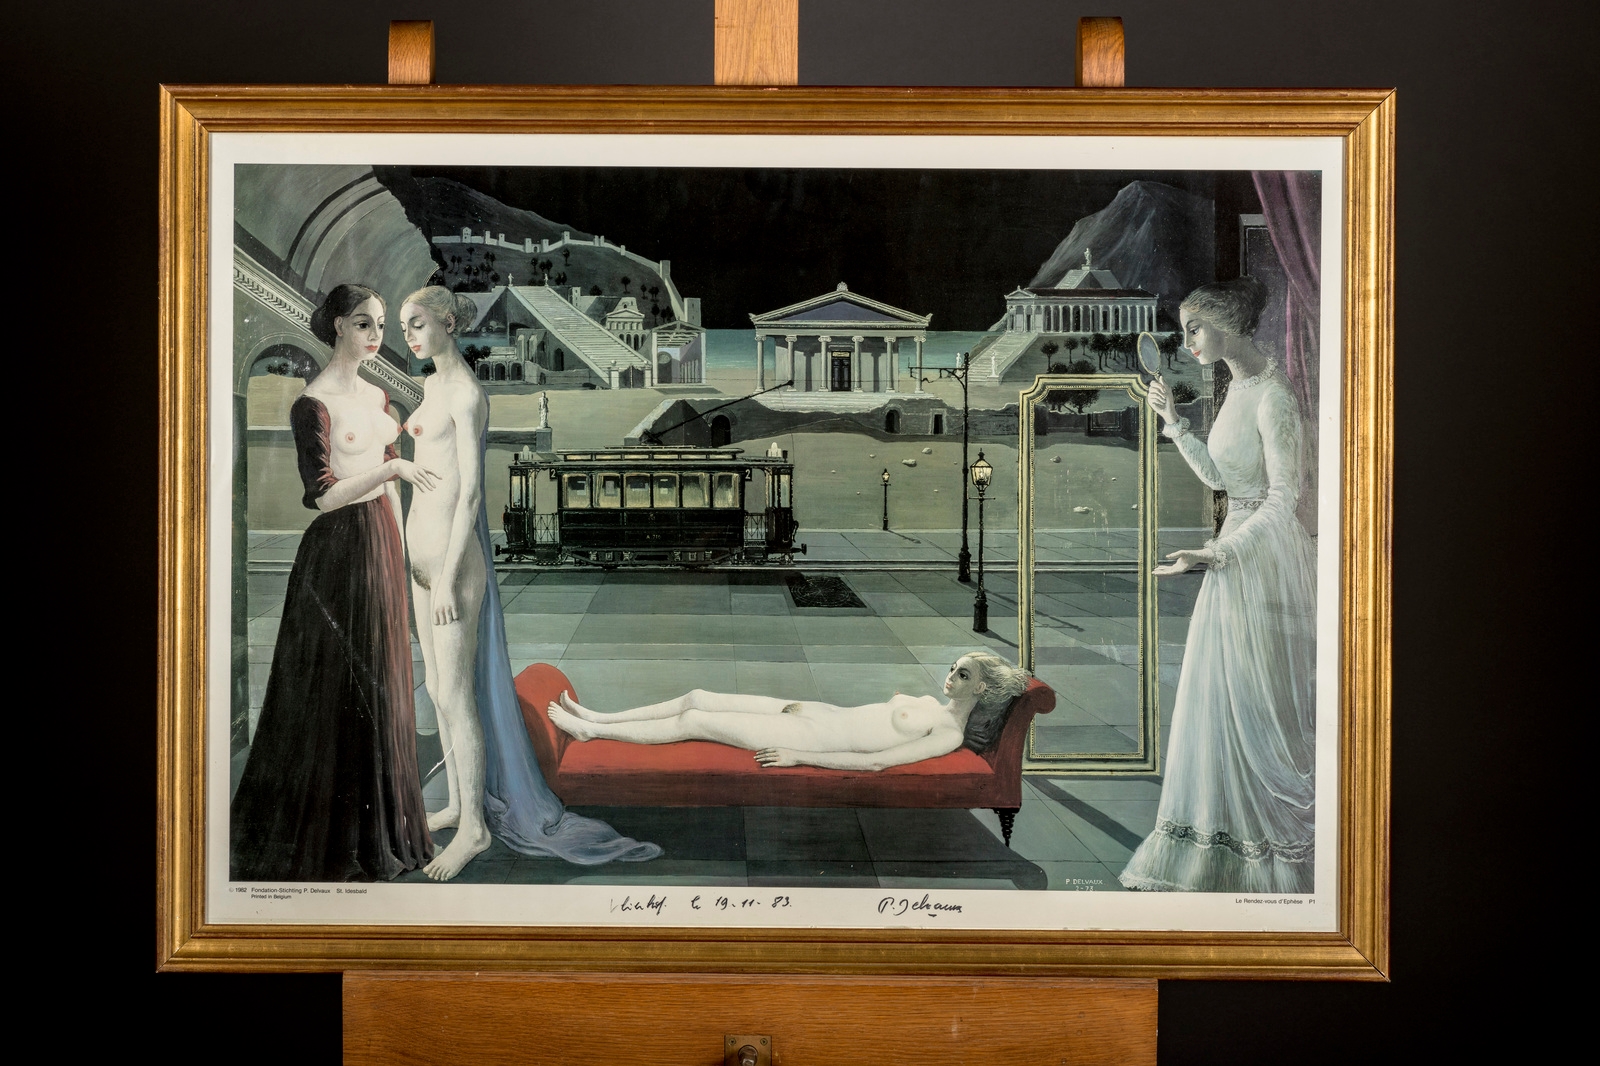 Untitled by Paul Delvaux, 1982